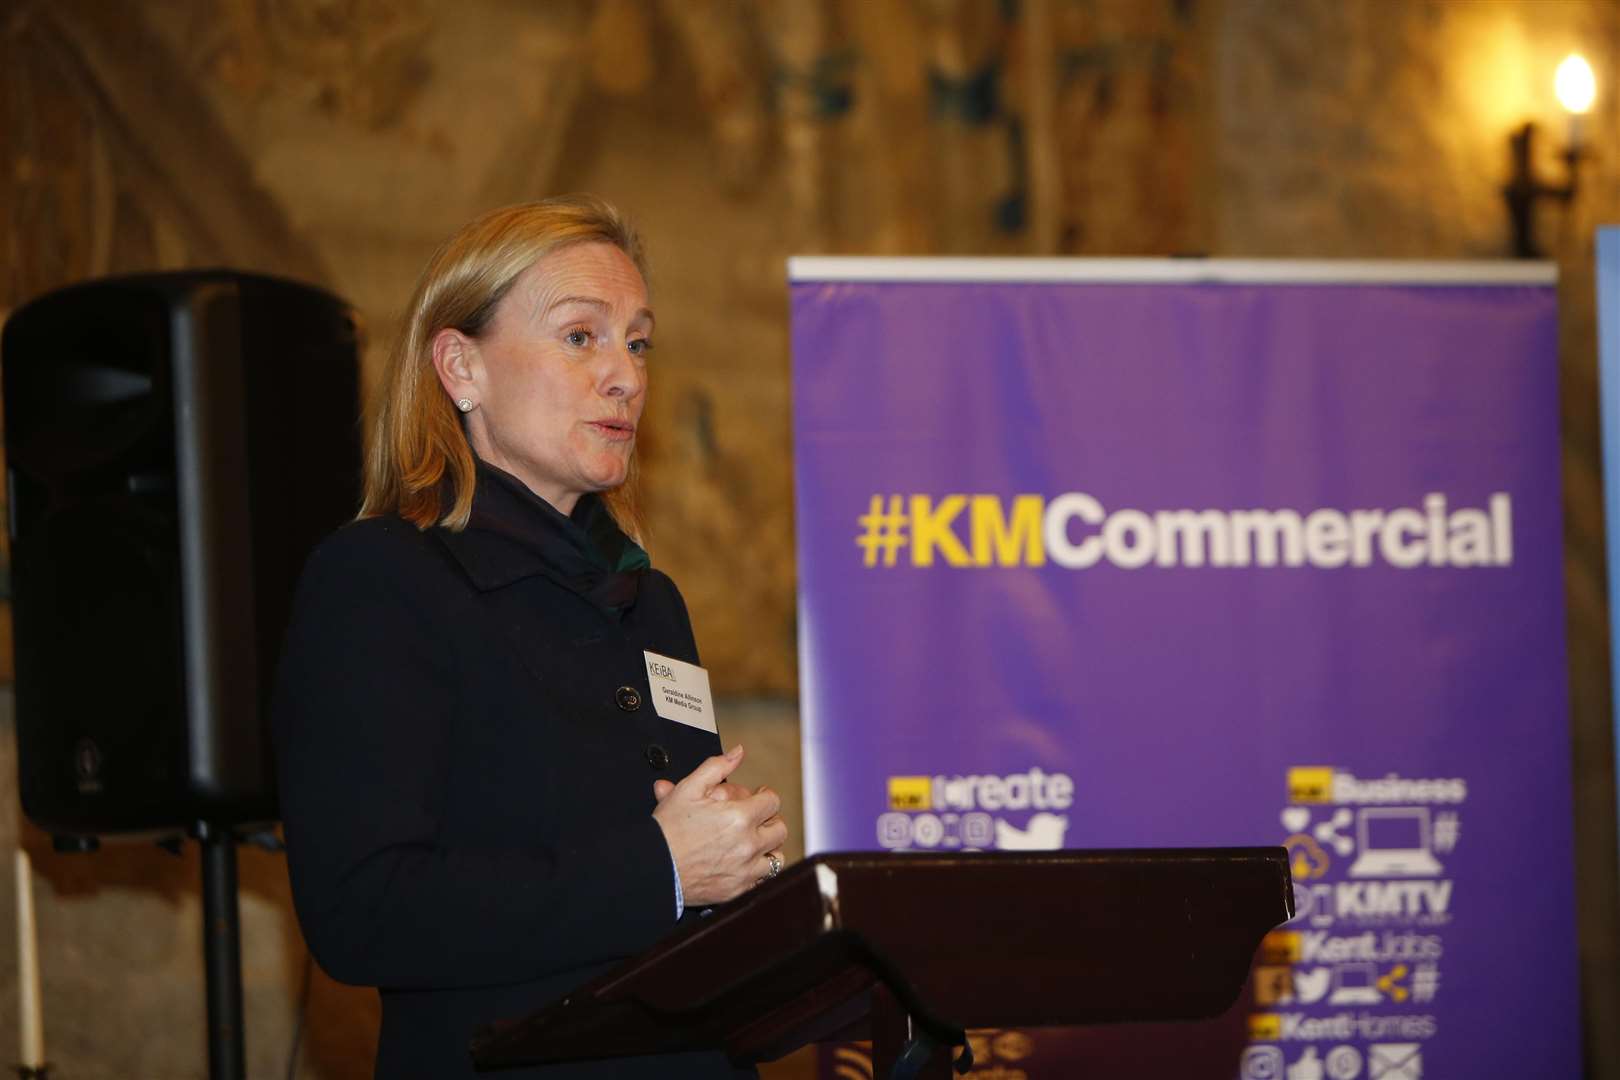 KM Group chairman Geraldine Allinson at the KEiBA 2019 launch event at Allington Castle in January